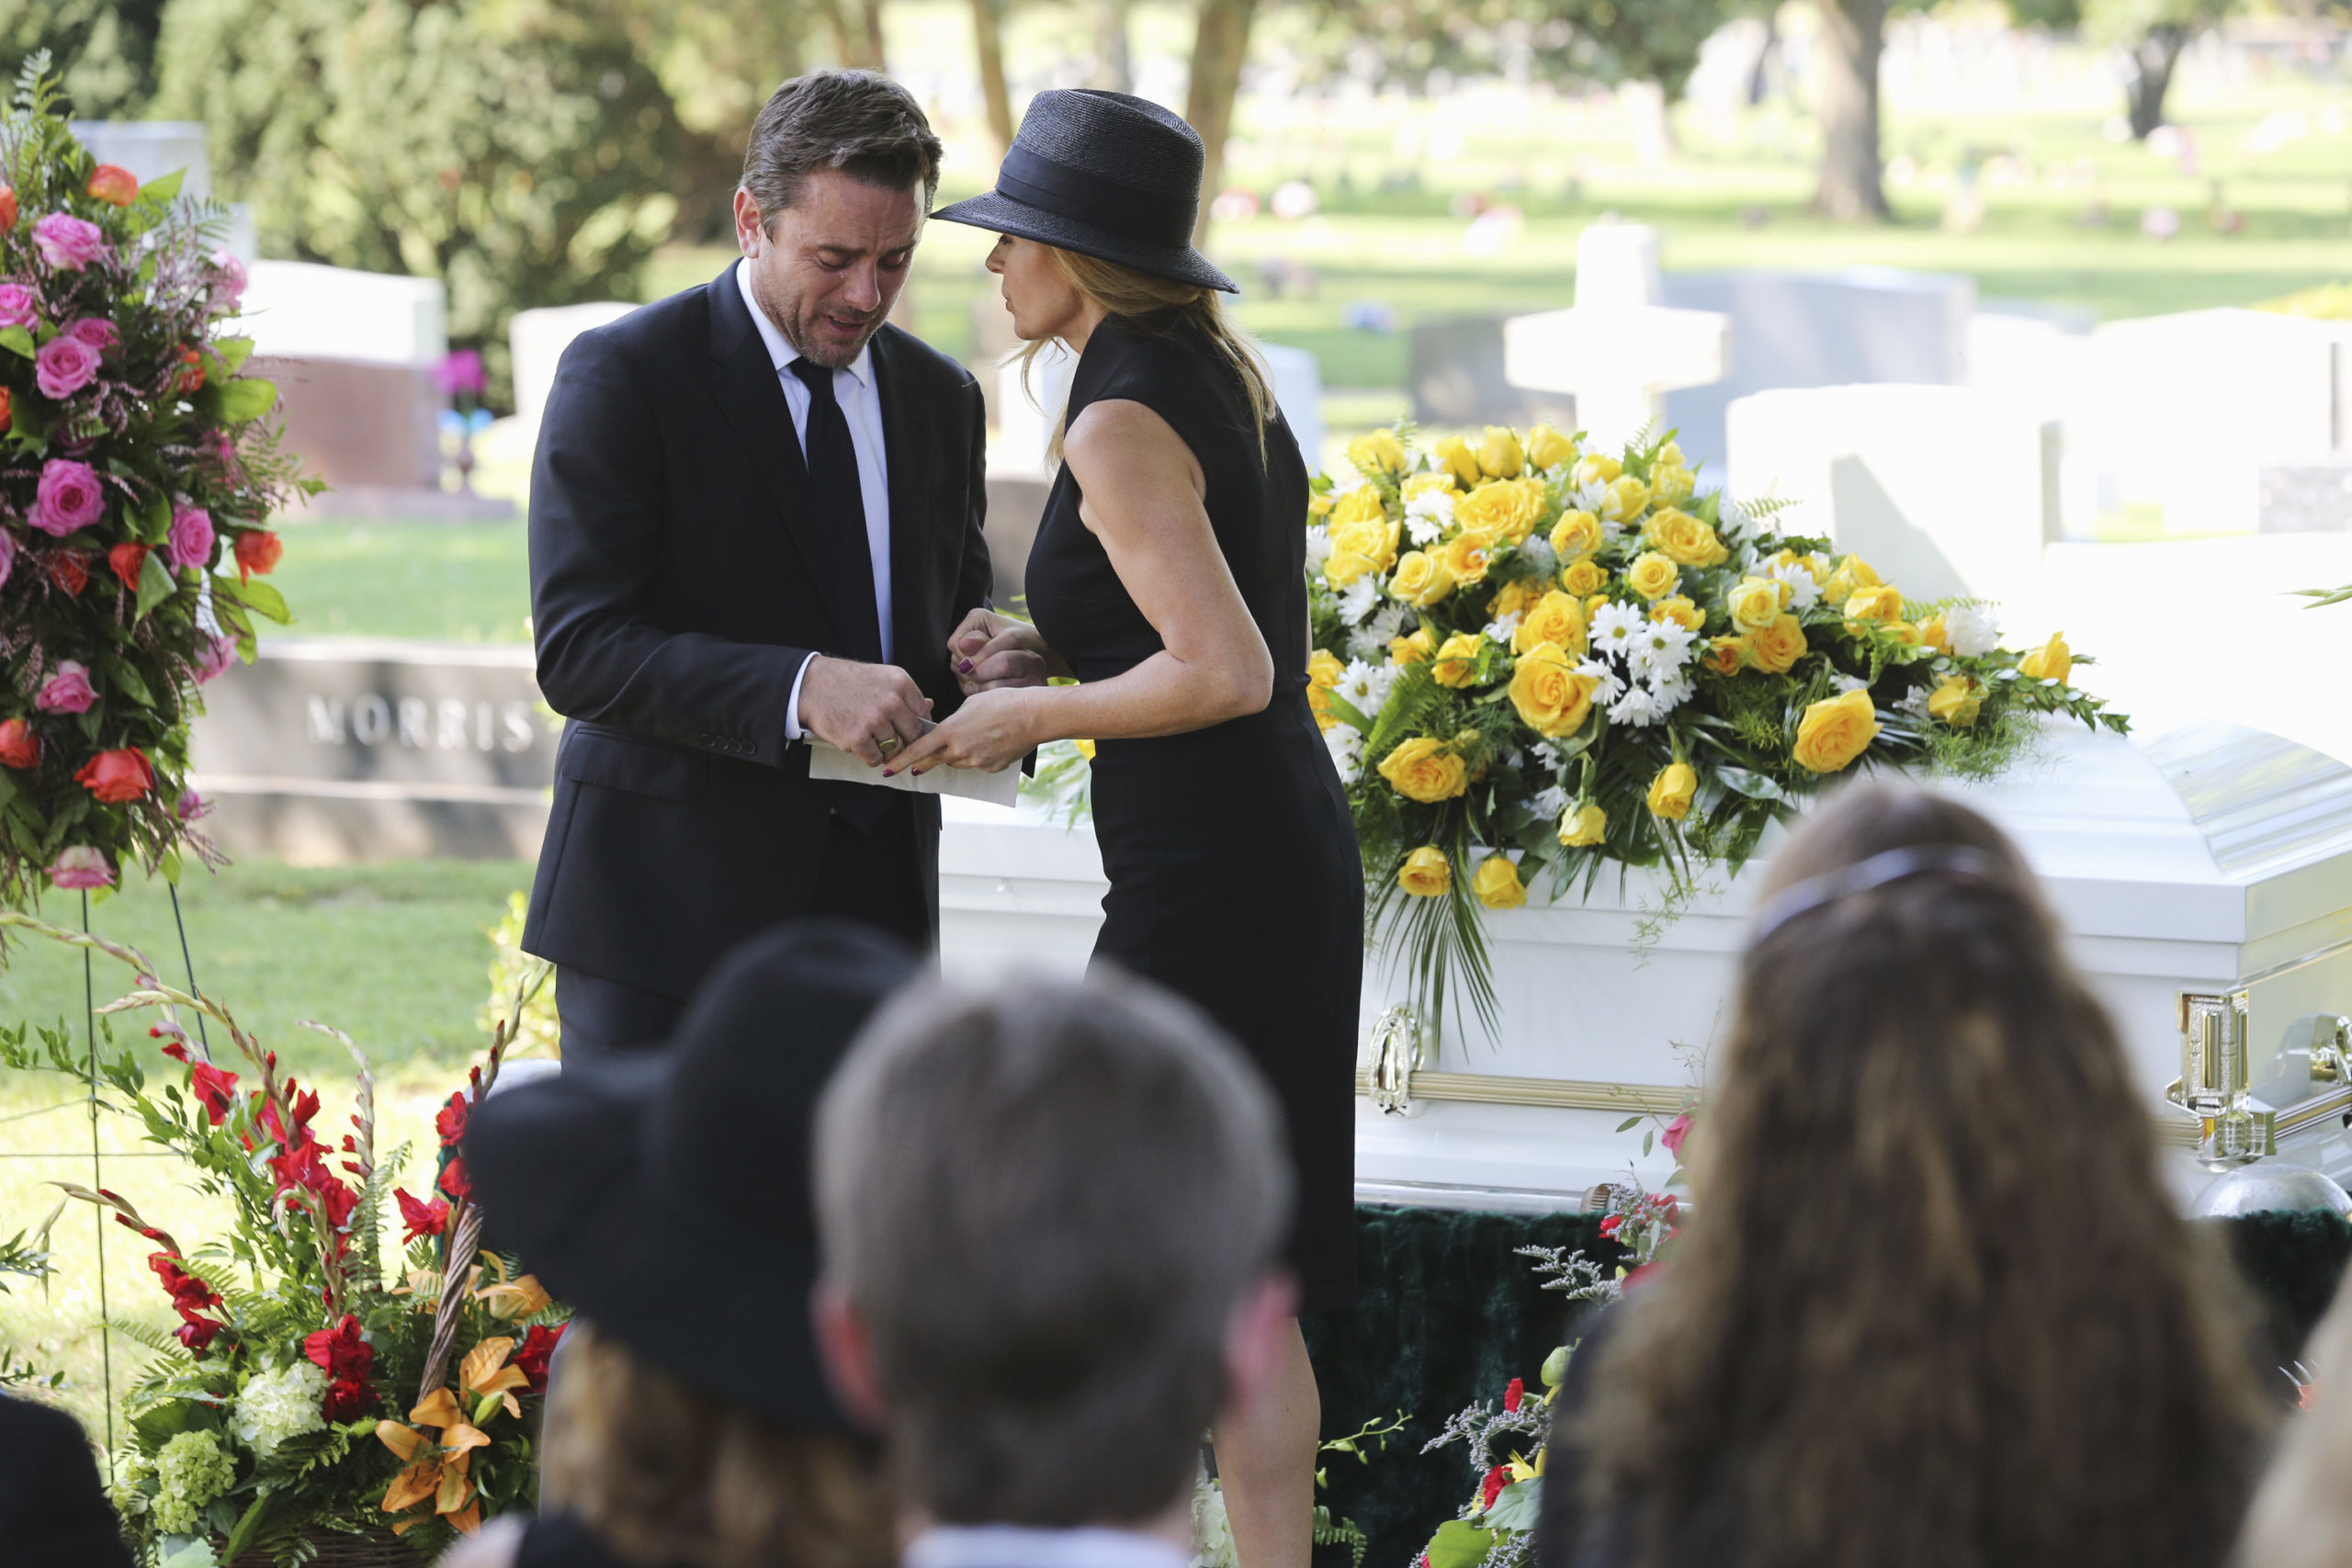 Nashville - Charles Esten and Connie Britton as a funeral - 'The Slender Threads That Bind Us Here'